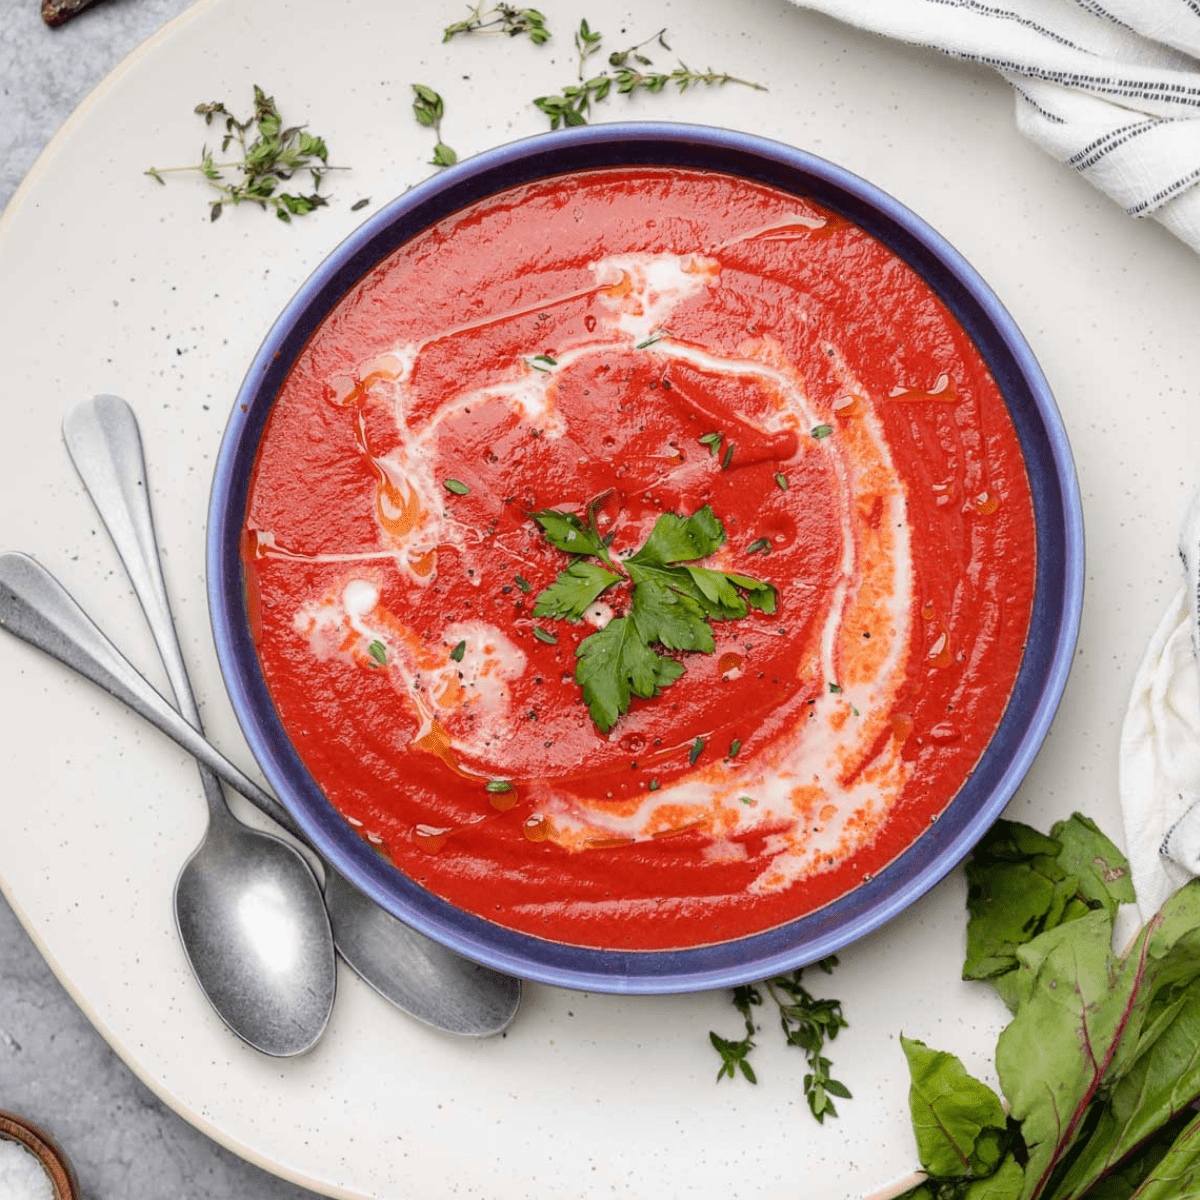 Beetroot and Carrot Soup Recipe